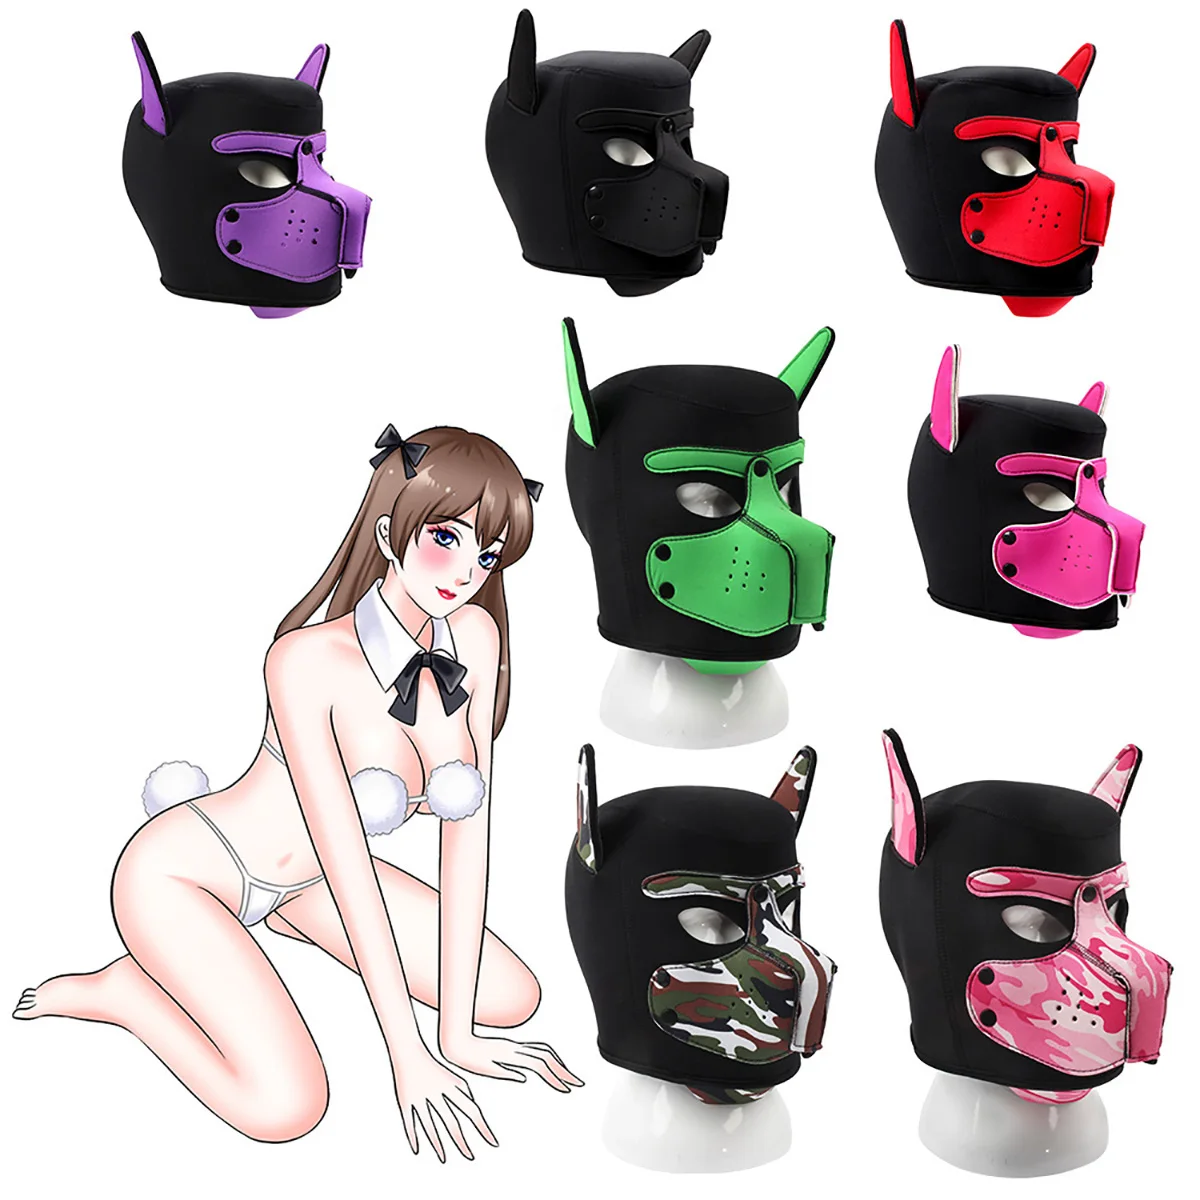 

1PCS Removable Dog Head Mask Headgear SM Alternative Toys Role-Playing Flirting Sex Toys For Women Men Party Mask